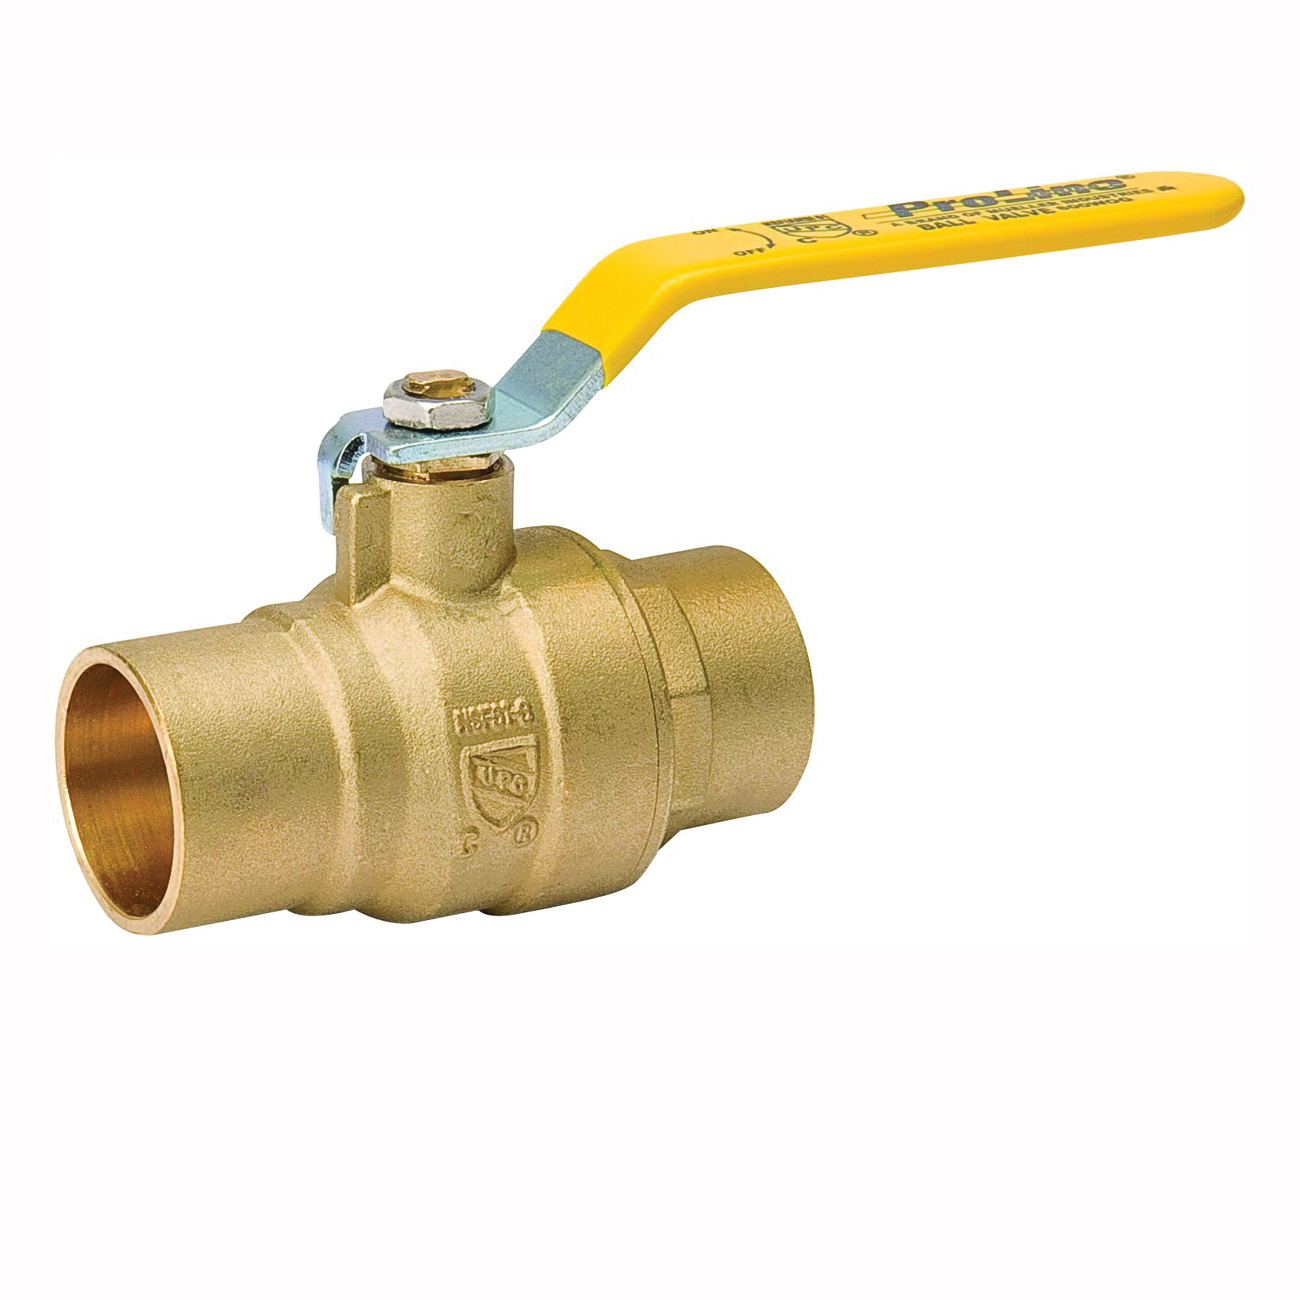 107-857NL Ball Valve, 1-1/2 in Connection, Compression, 600/125 psi Pressure, Manual Actuator, Brass Body